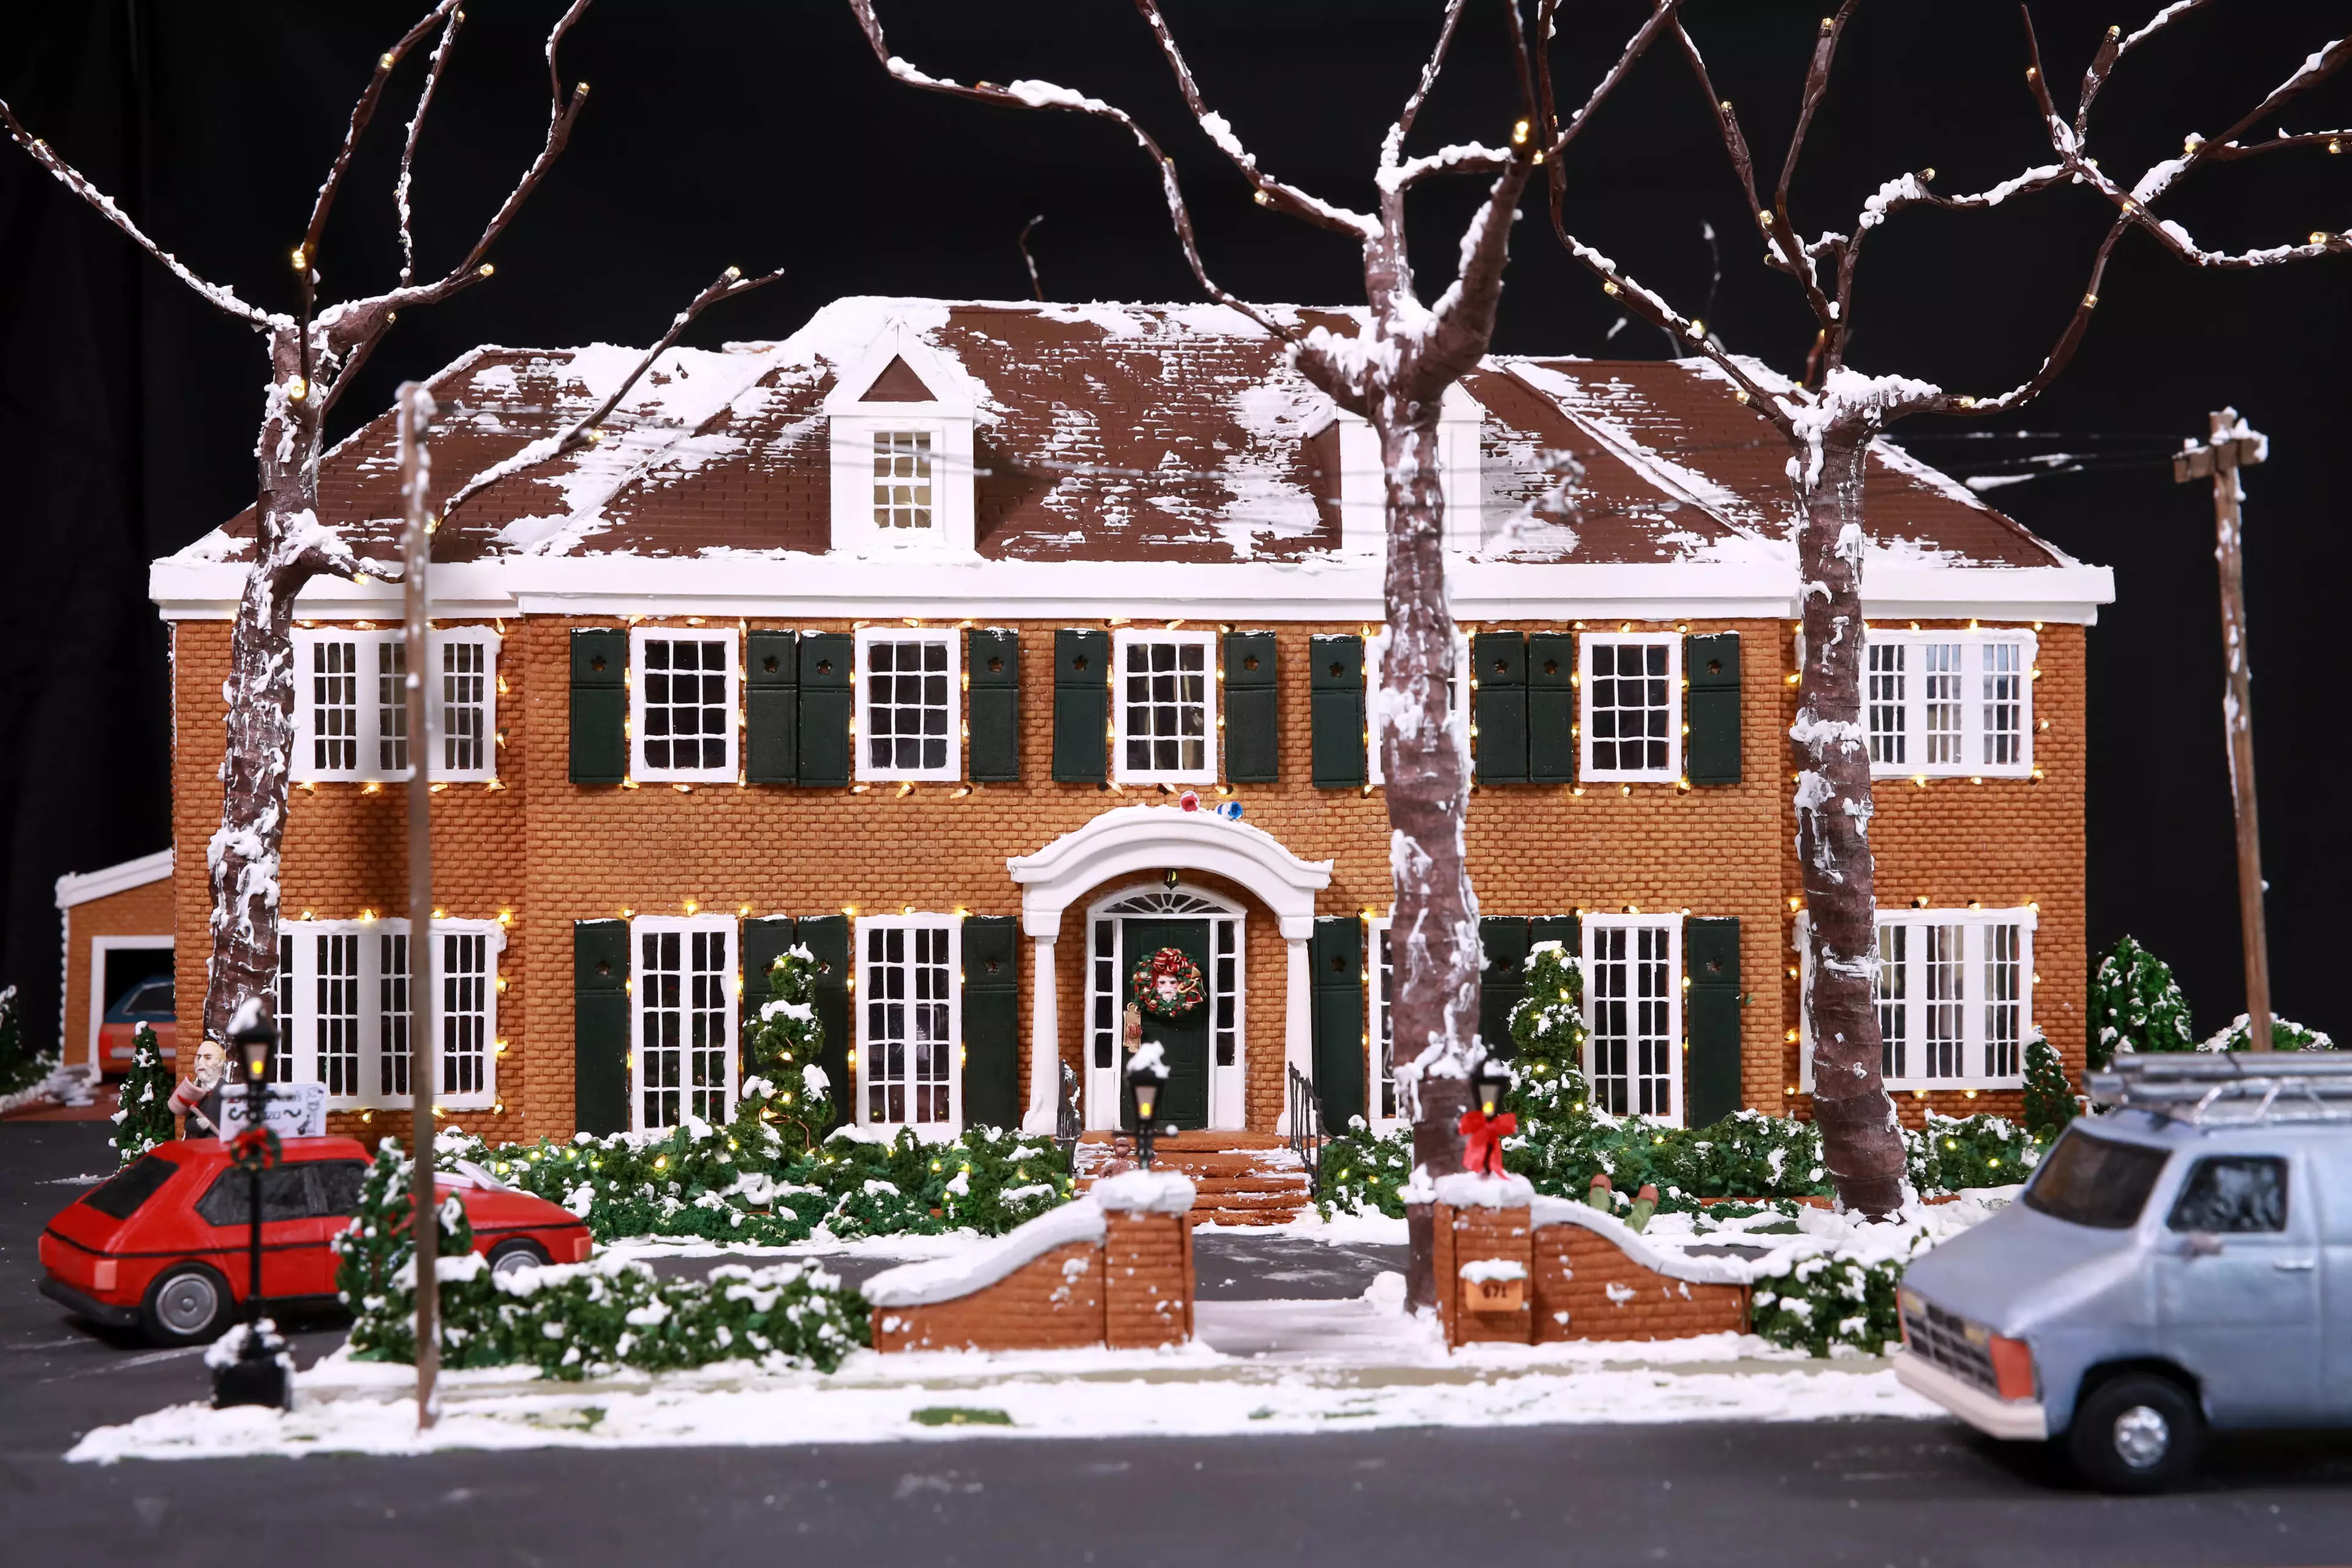 The house is made entirely by gingerbread (